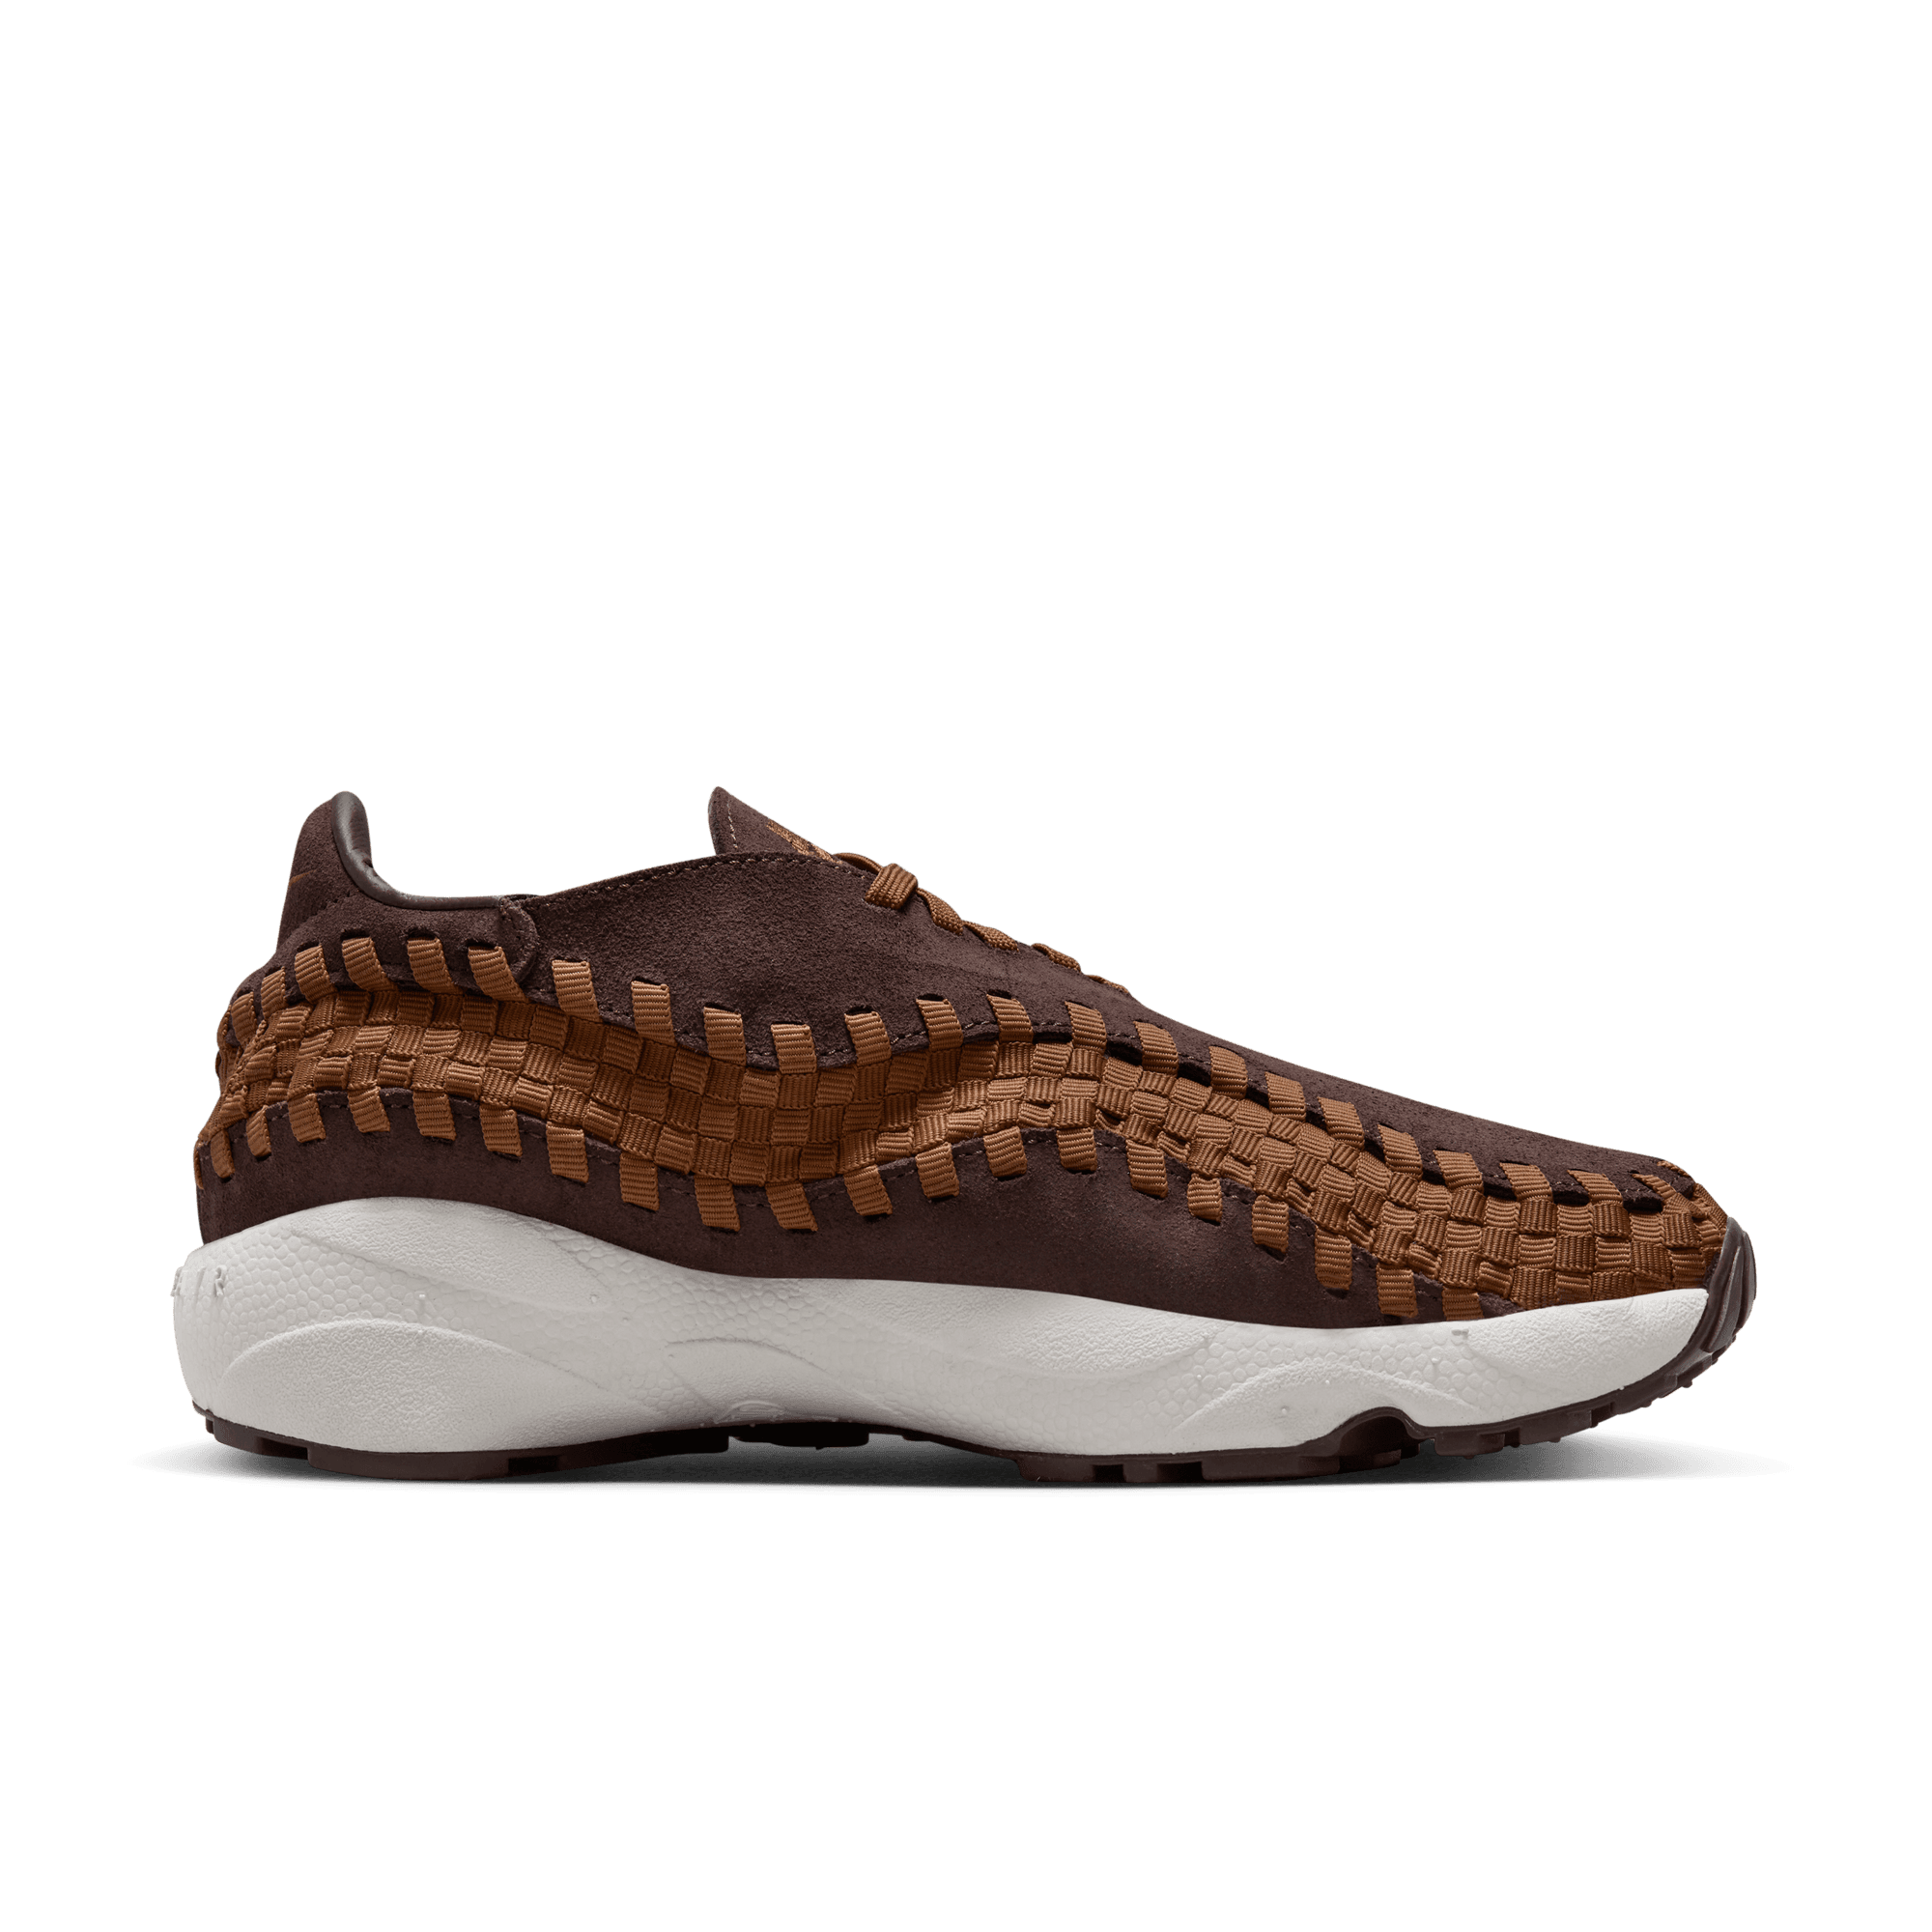 WMNS AIR FOOTSCAPE WOVEN "EARTH"